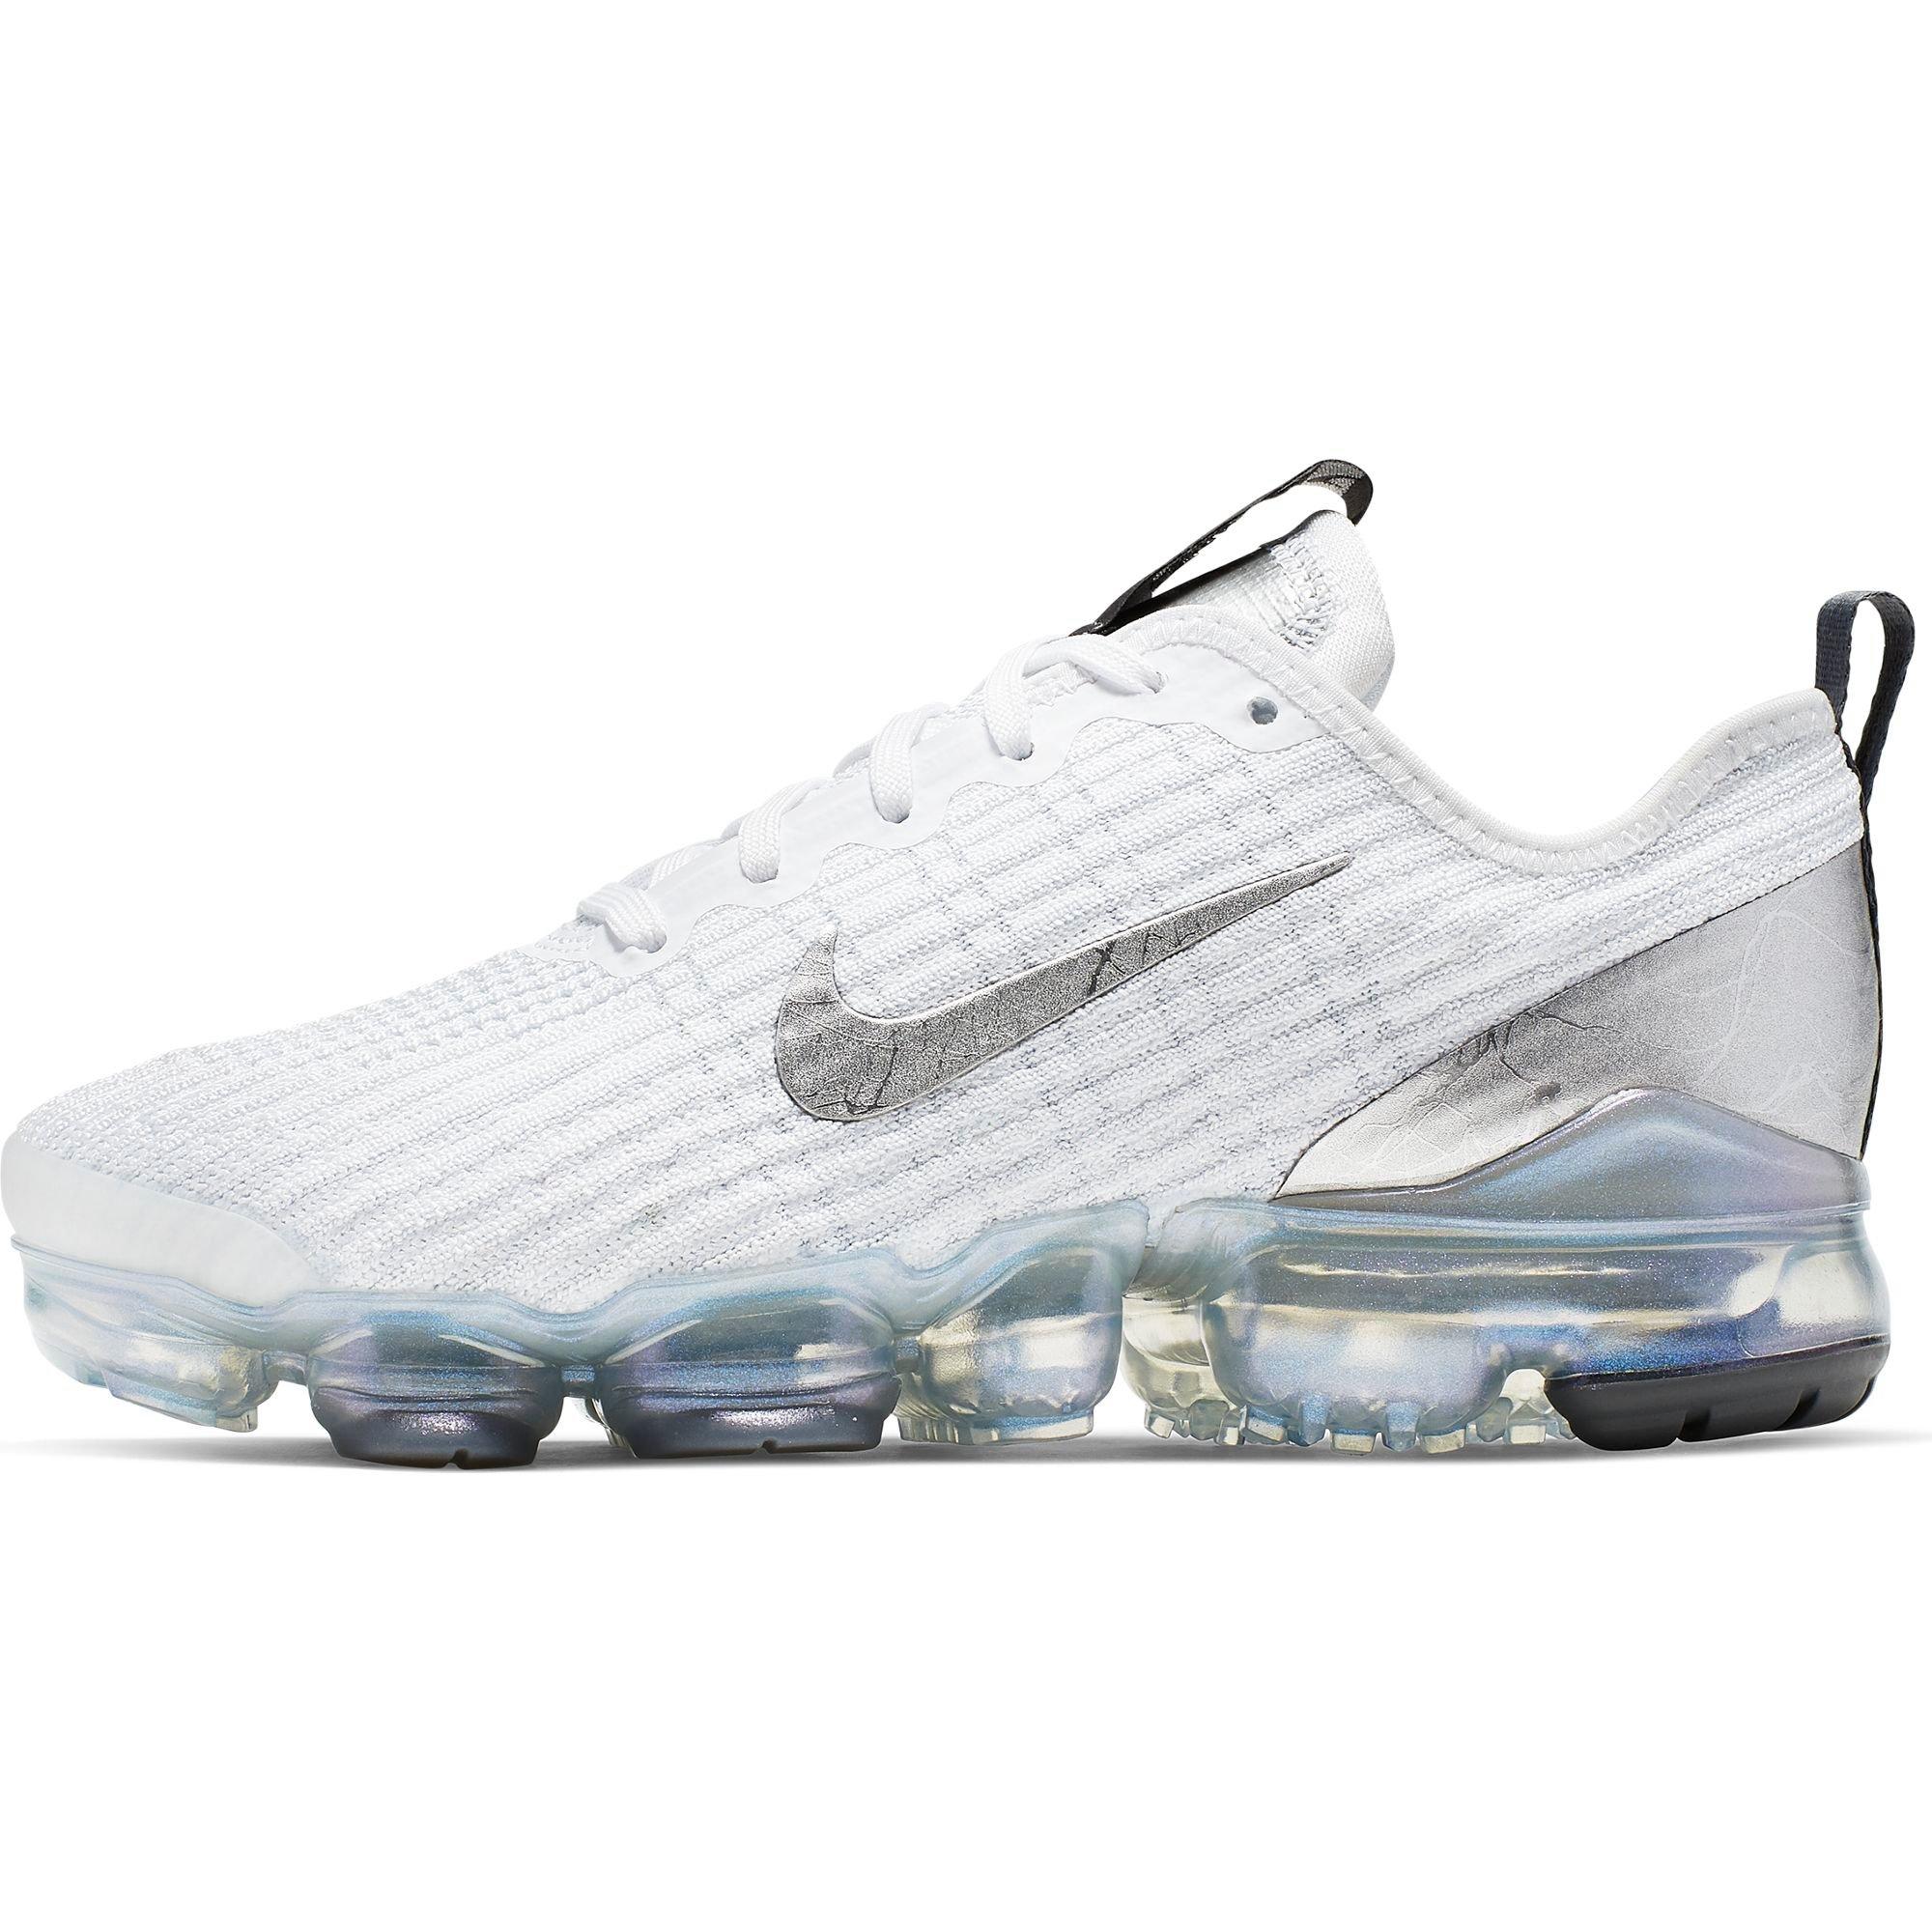 vapormax white and silver